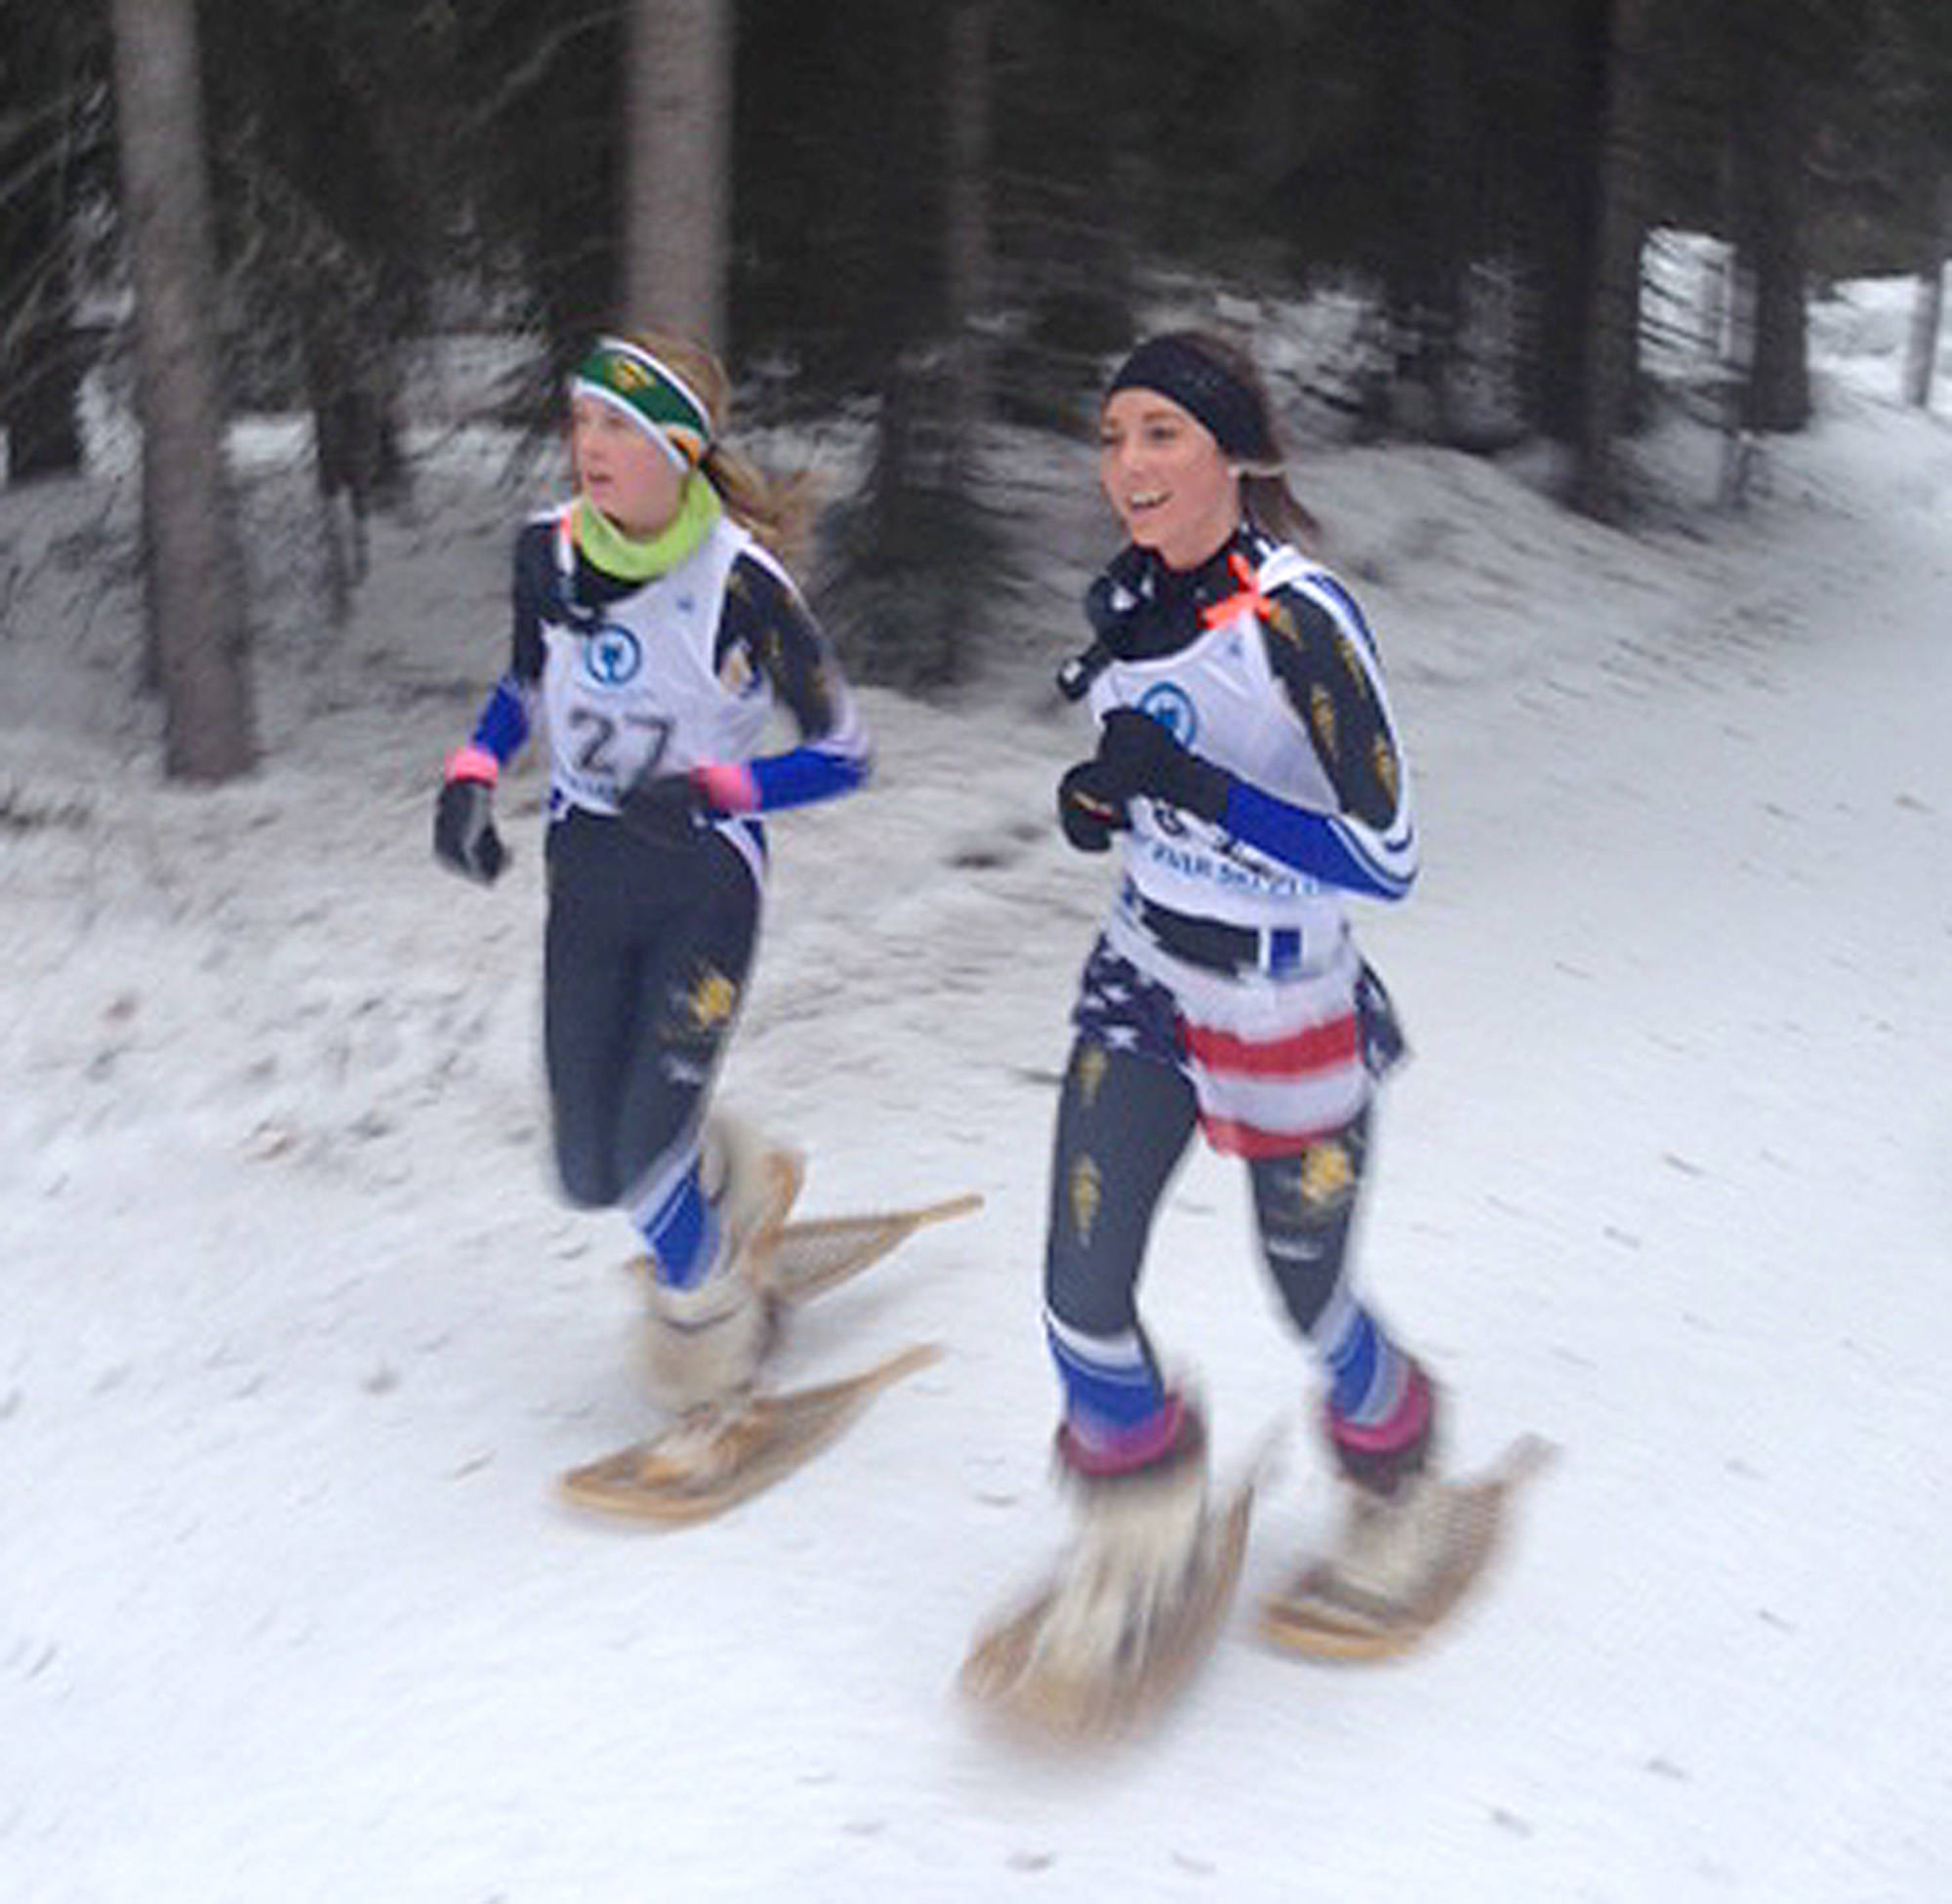 Kenai’s Riana Boonstra (right) races with Alaskan teammate Clare Howard at the 25th biannual Arctic Winter Games in Hay River, Canada. (Photo provided by Kelli Boonstra)